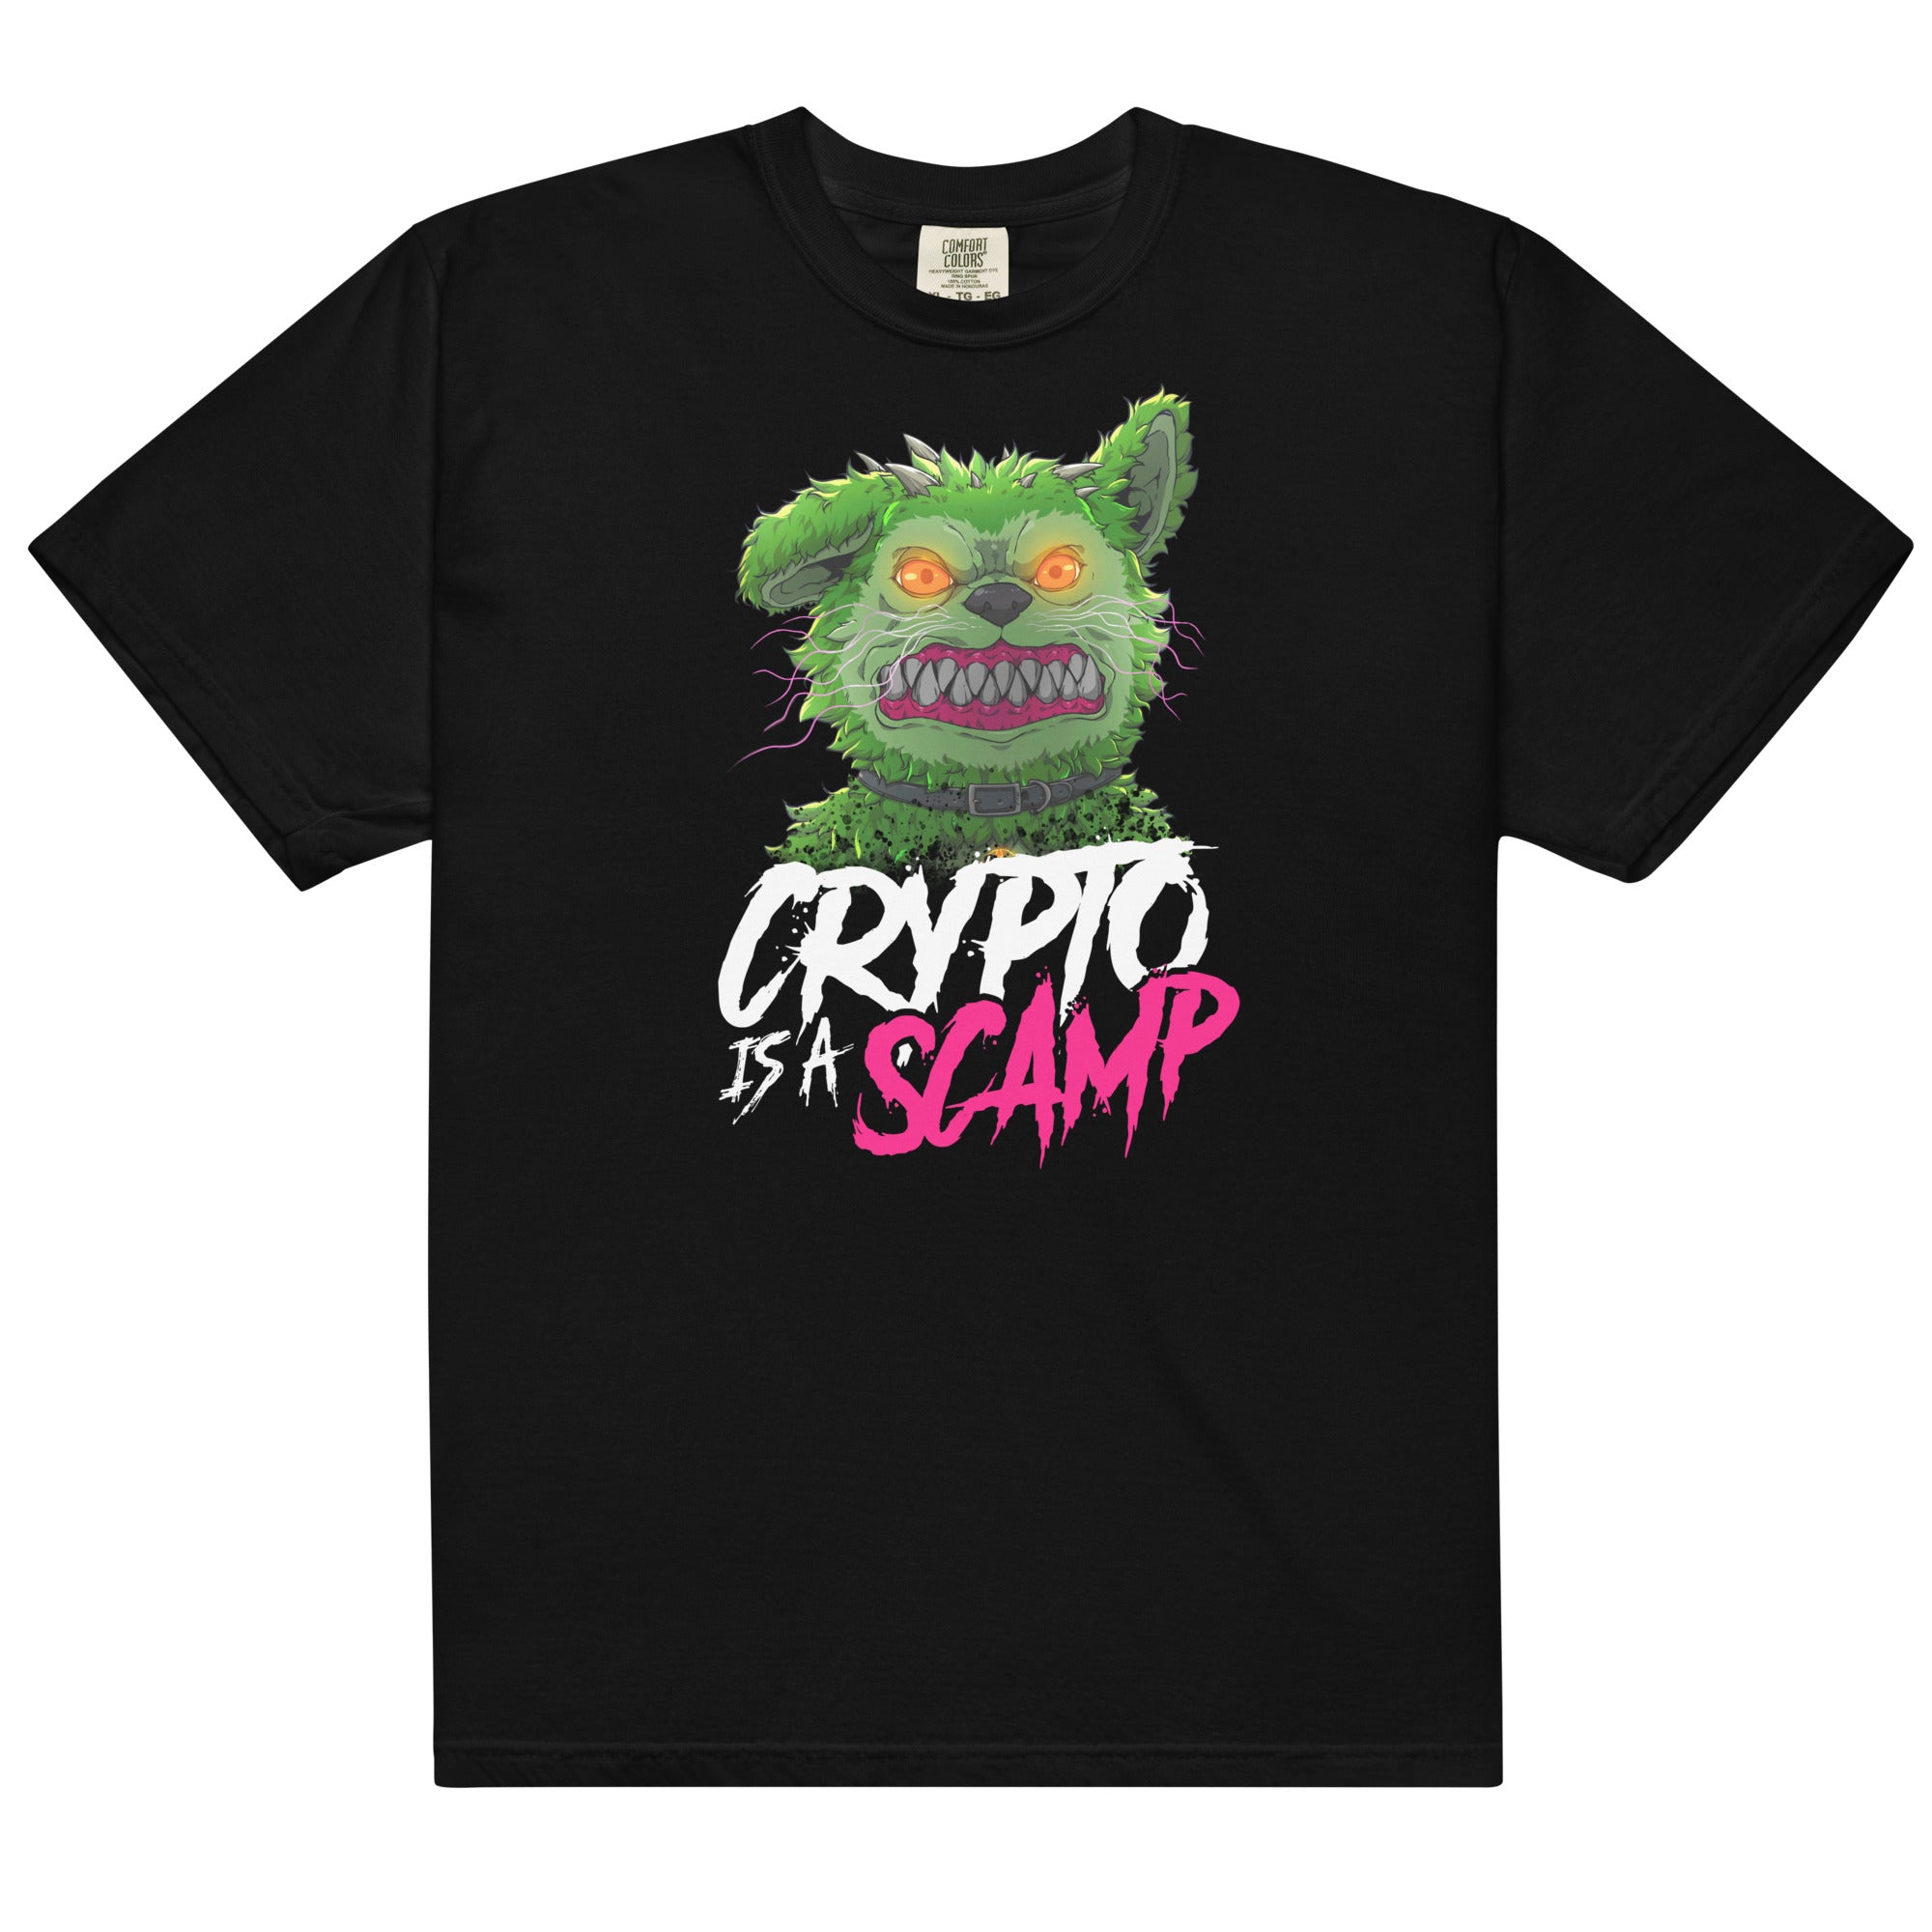 CRYPTO IS A SCAMP /// UNISEX T-SHIRT